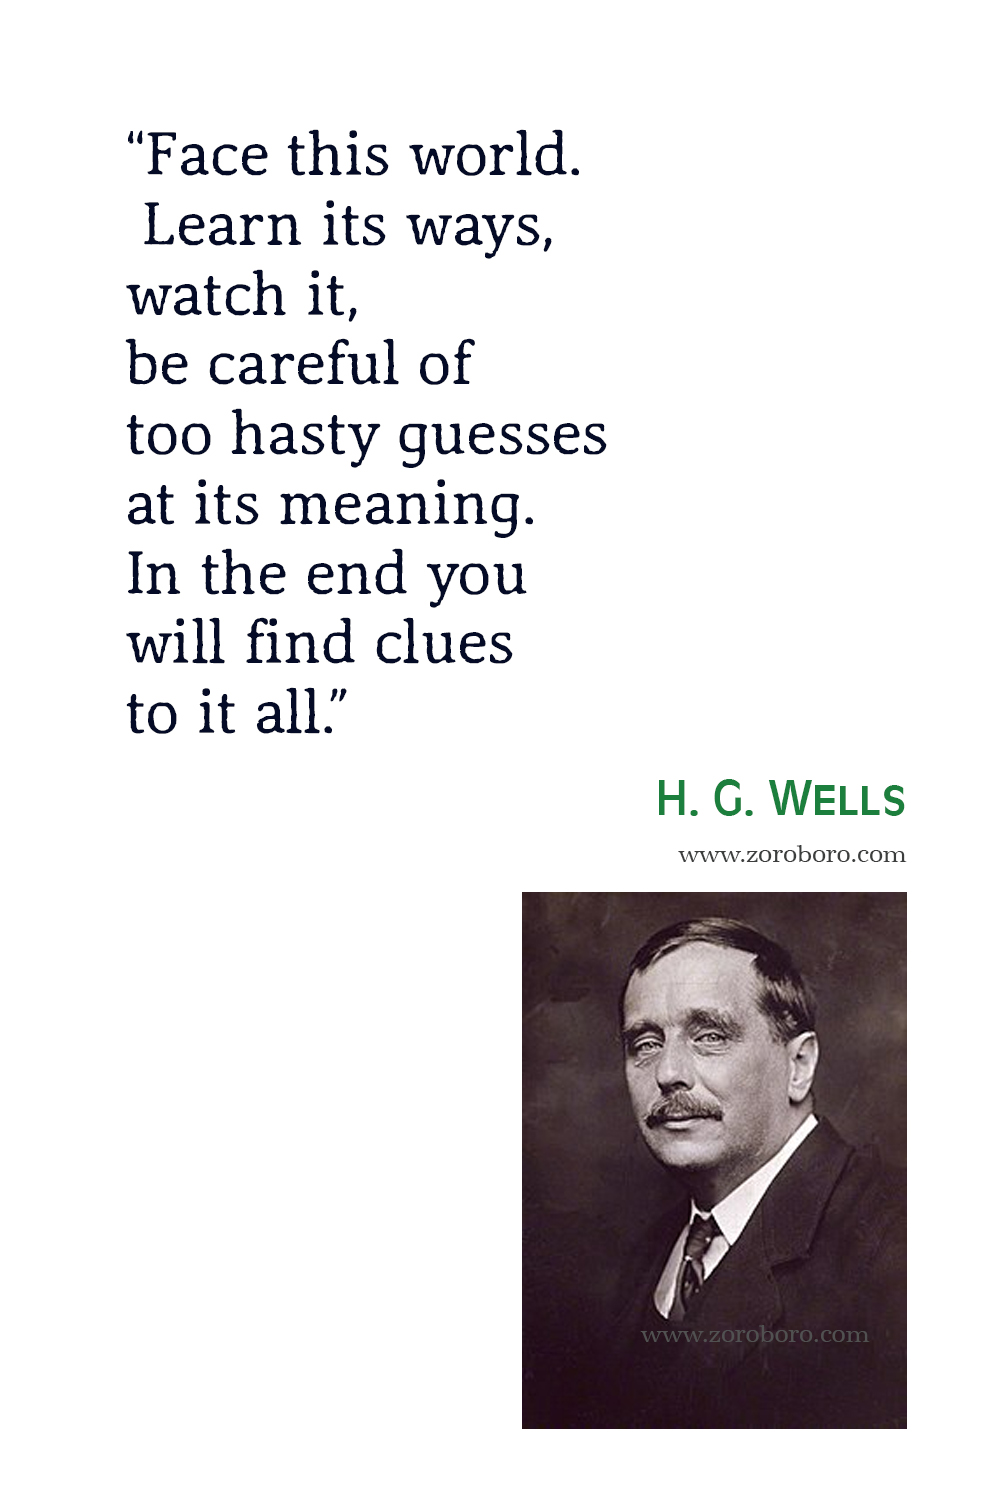 H. G. Wells Quotes, H. G. Wells The Time Machine, The Invisible Man, The Island of Dr. Moreau Quotes, H. G. Wells Books, Short Stories Quotes,H. G. Wells The Time Machine